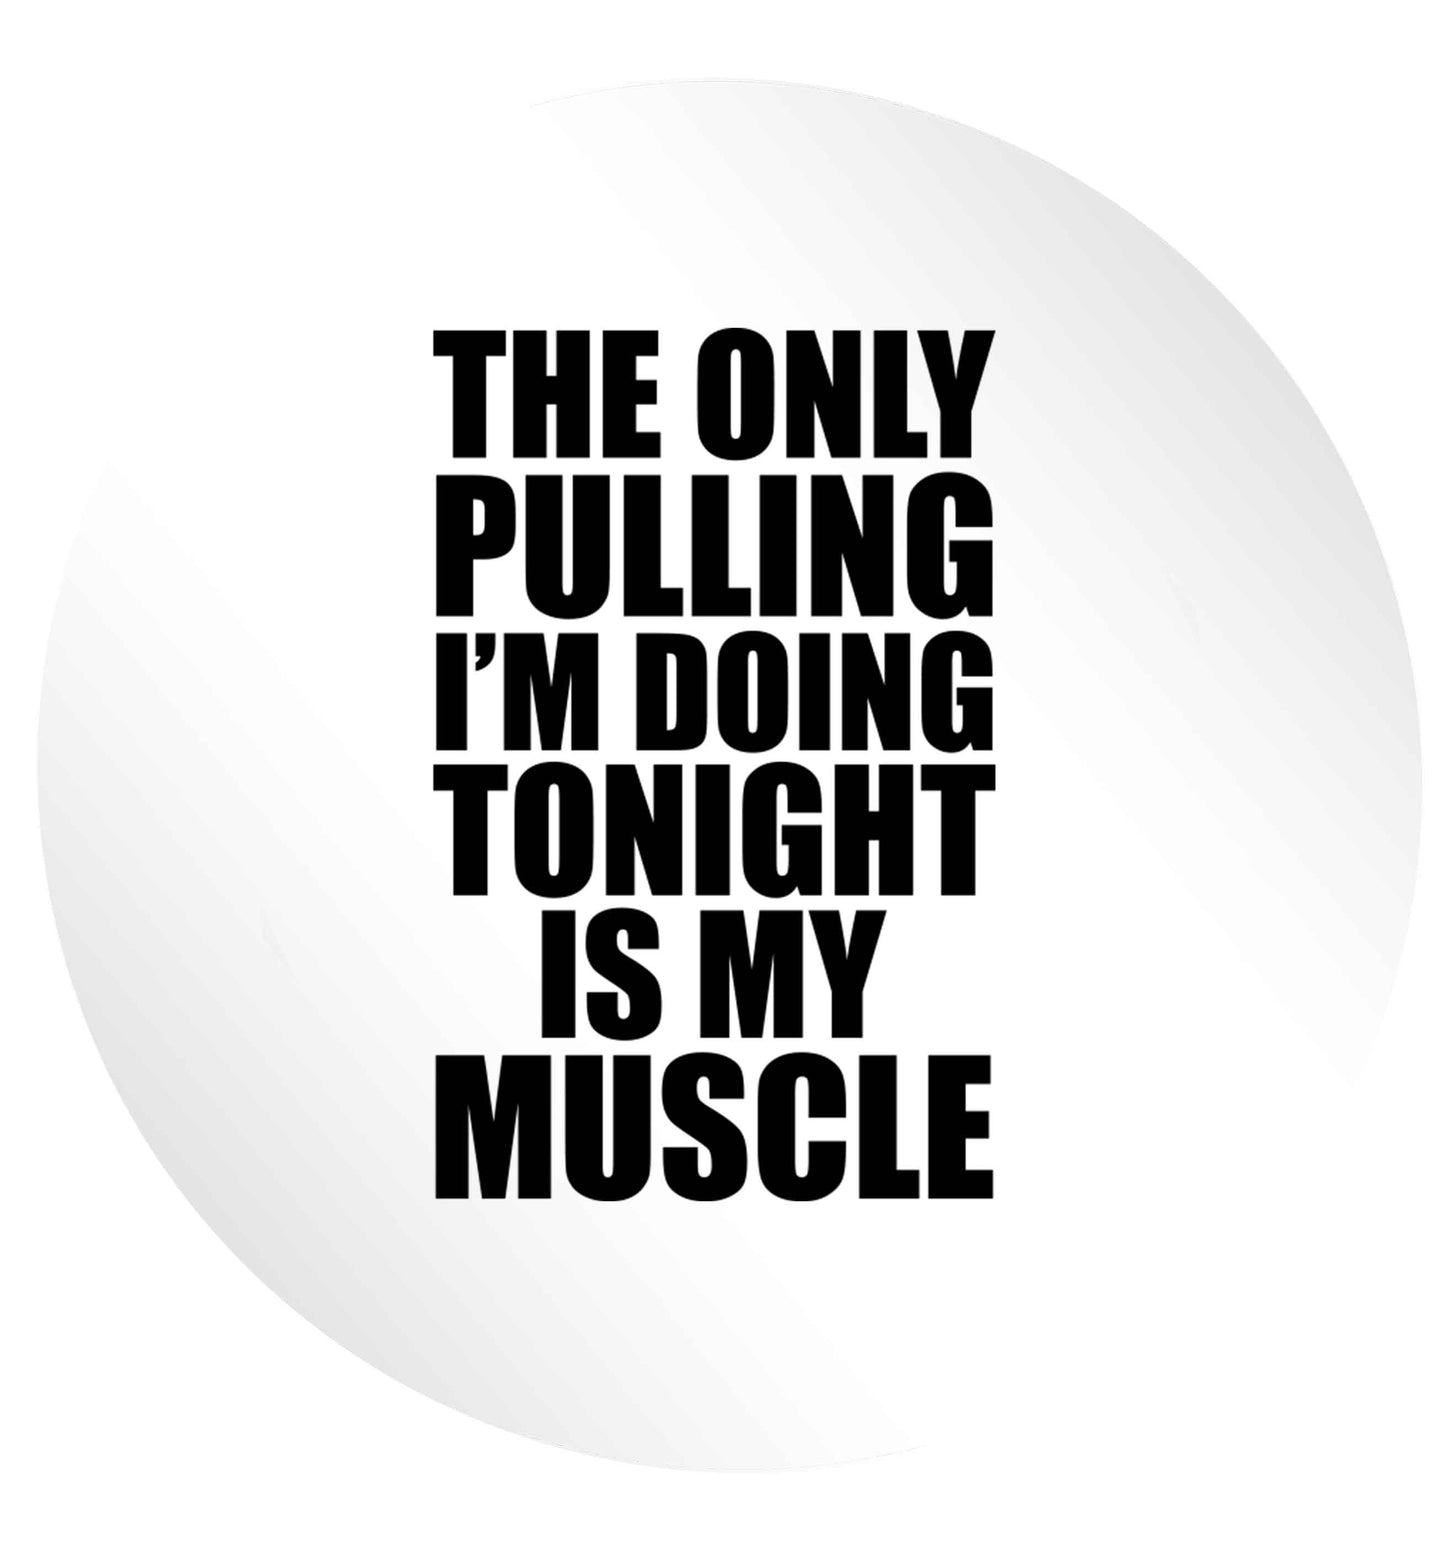 The only pulling I'm doing tonight is my muscle 24 @ 45mm matt circle stickers